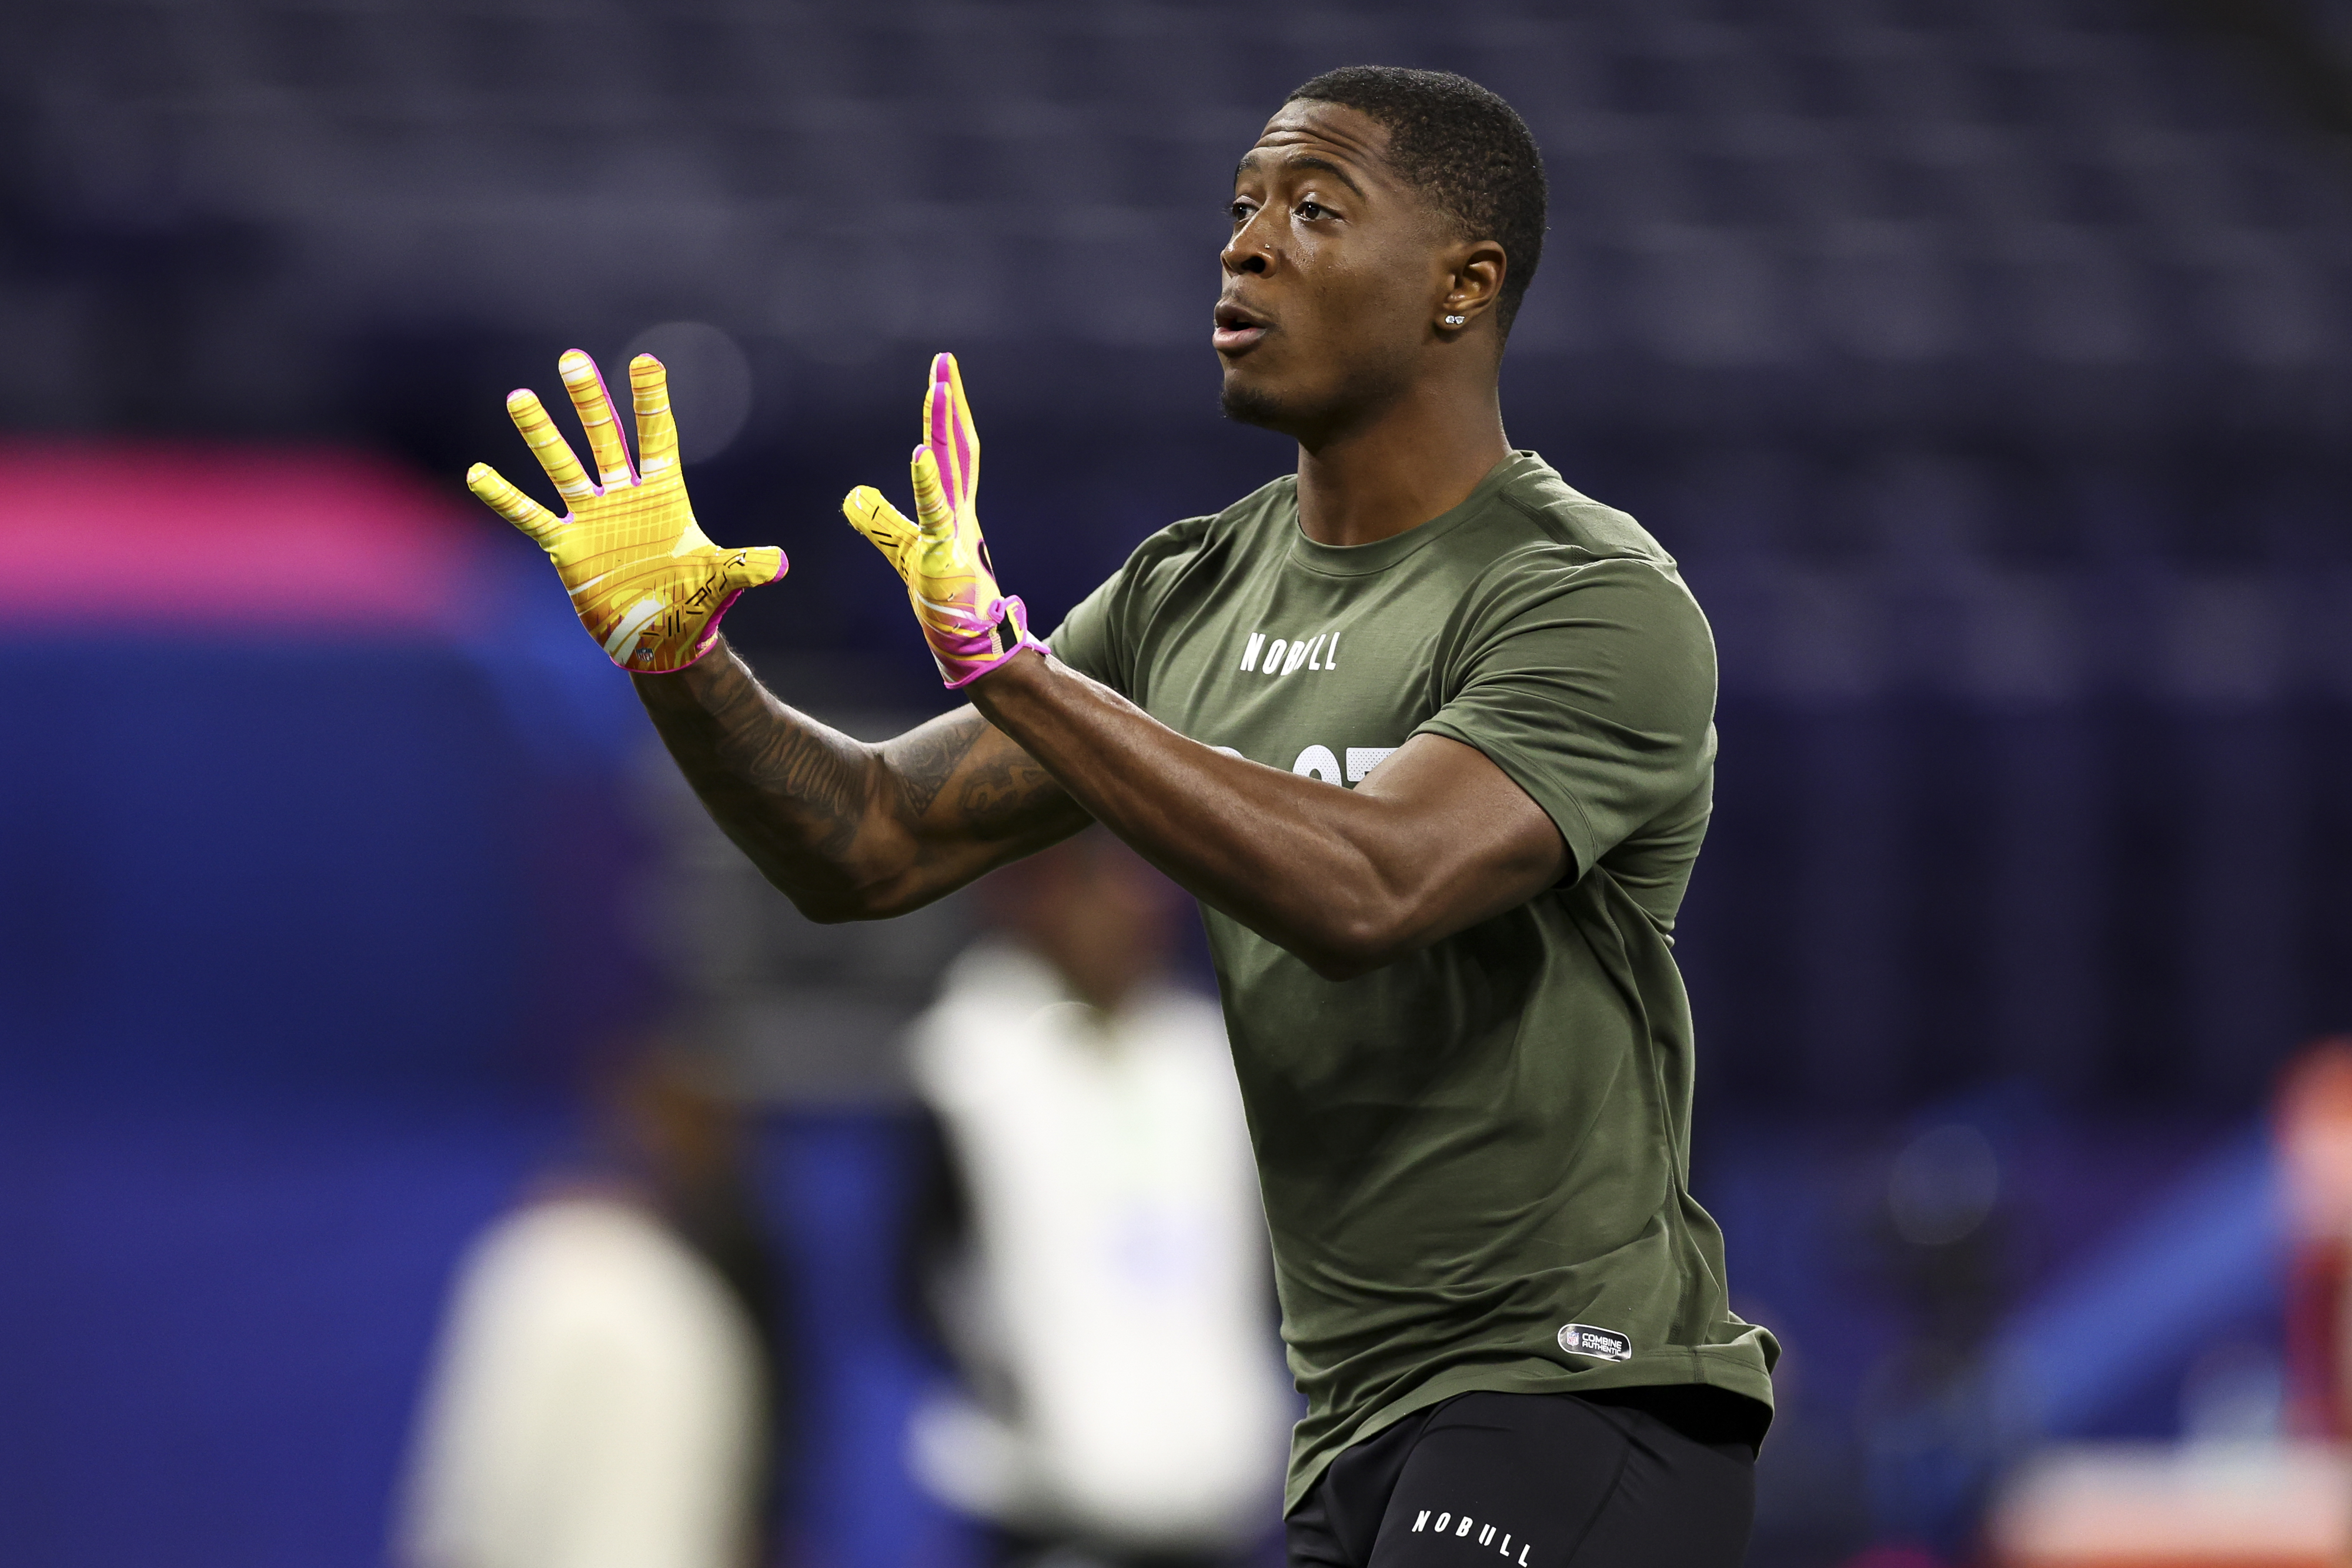 Football player in a workout shirt and gloves catches a pass during pre-game warm-up